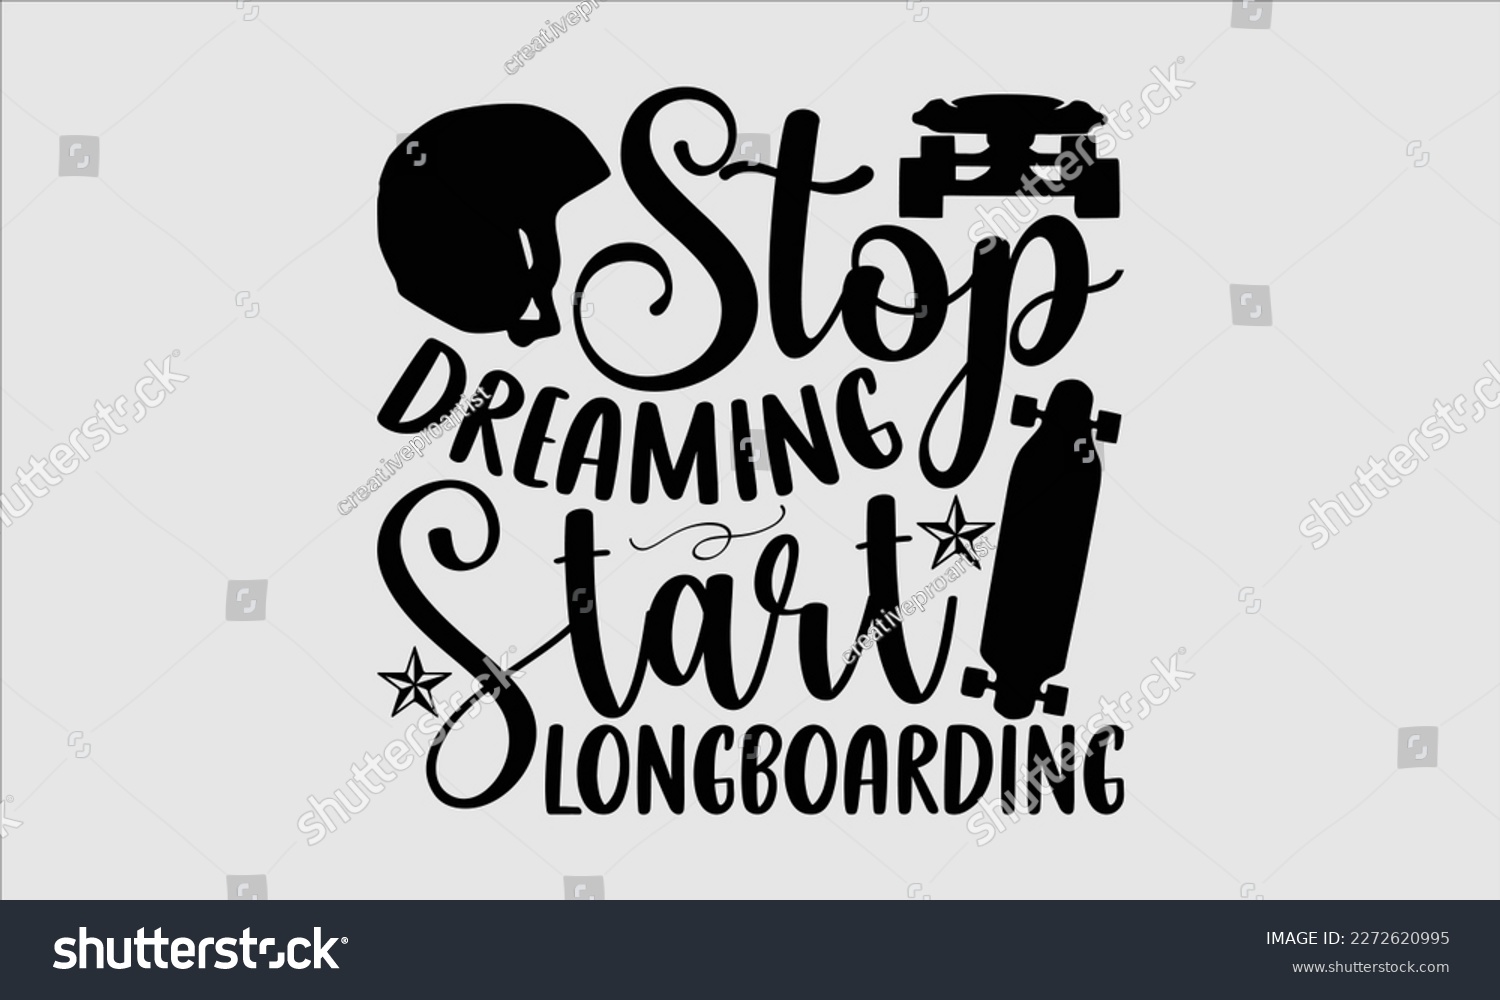 SVG of Stop dreaming start longboarding- Longboarding T- shirt Design, Hand drawn lettering phrase, Illustration for prints on t-shirts and bags, posters, funny eps files, svg cricut svg